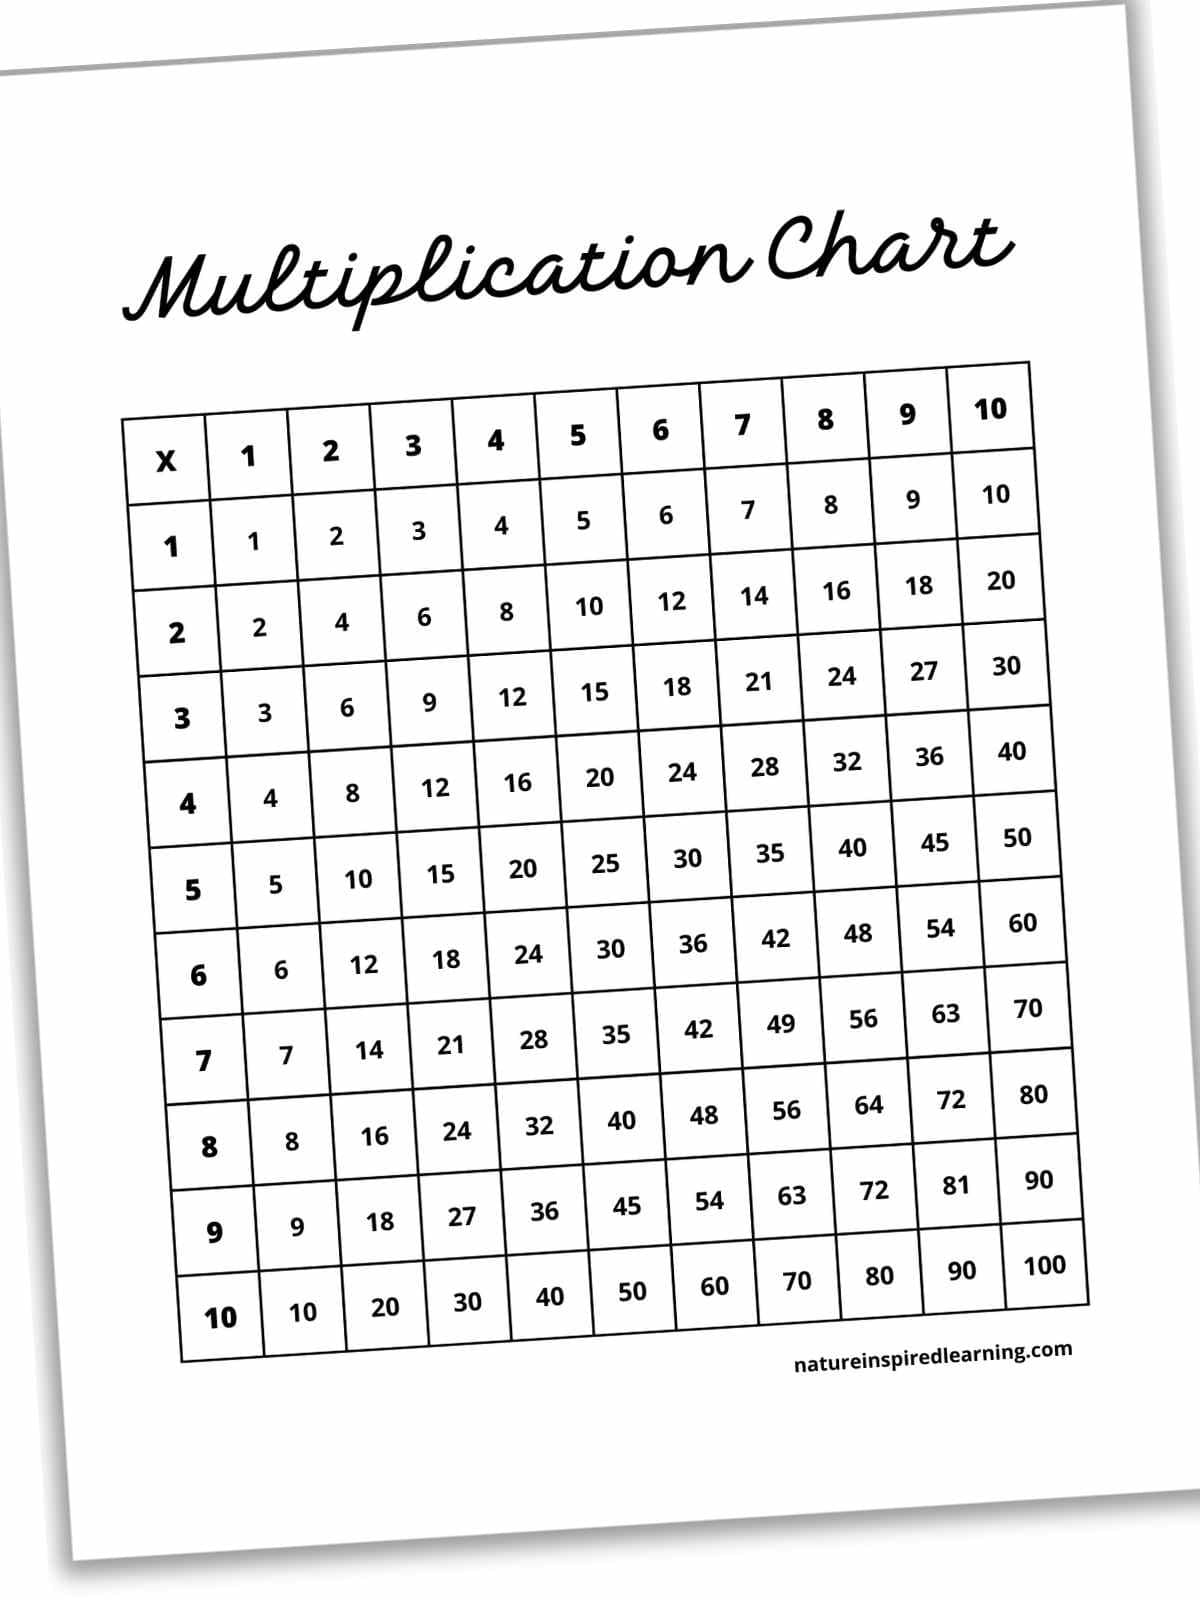 10 by 10 multiplication chart with white boxes and black text. Title written in cursive across the top. Printable slanted with a drop shadow.